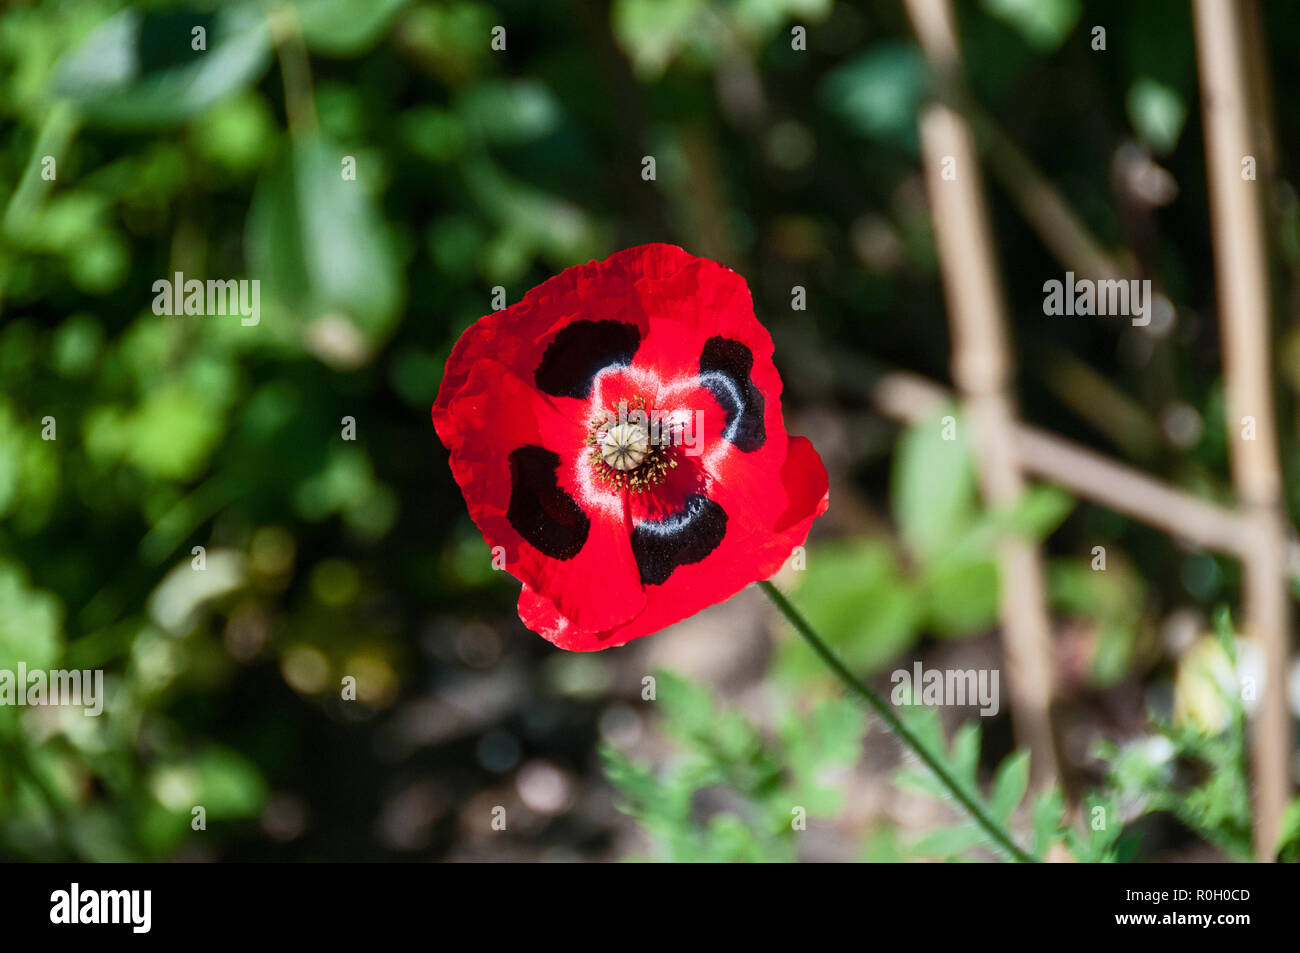 Around the UK - The Poppy - after the First World War, the poppy was adopted as a symbol of Remembrance. Stock Photo